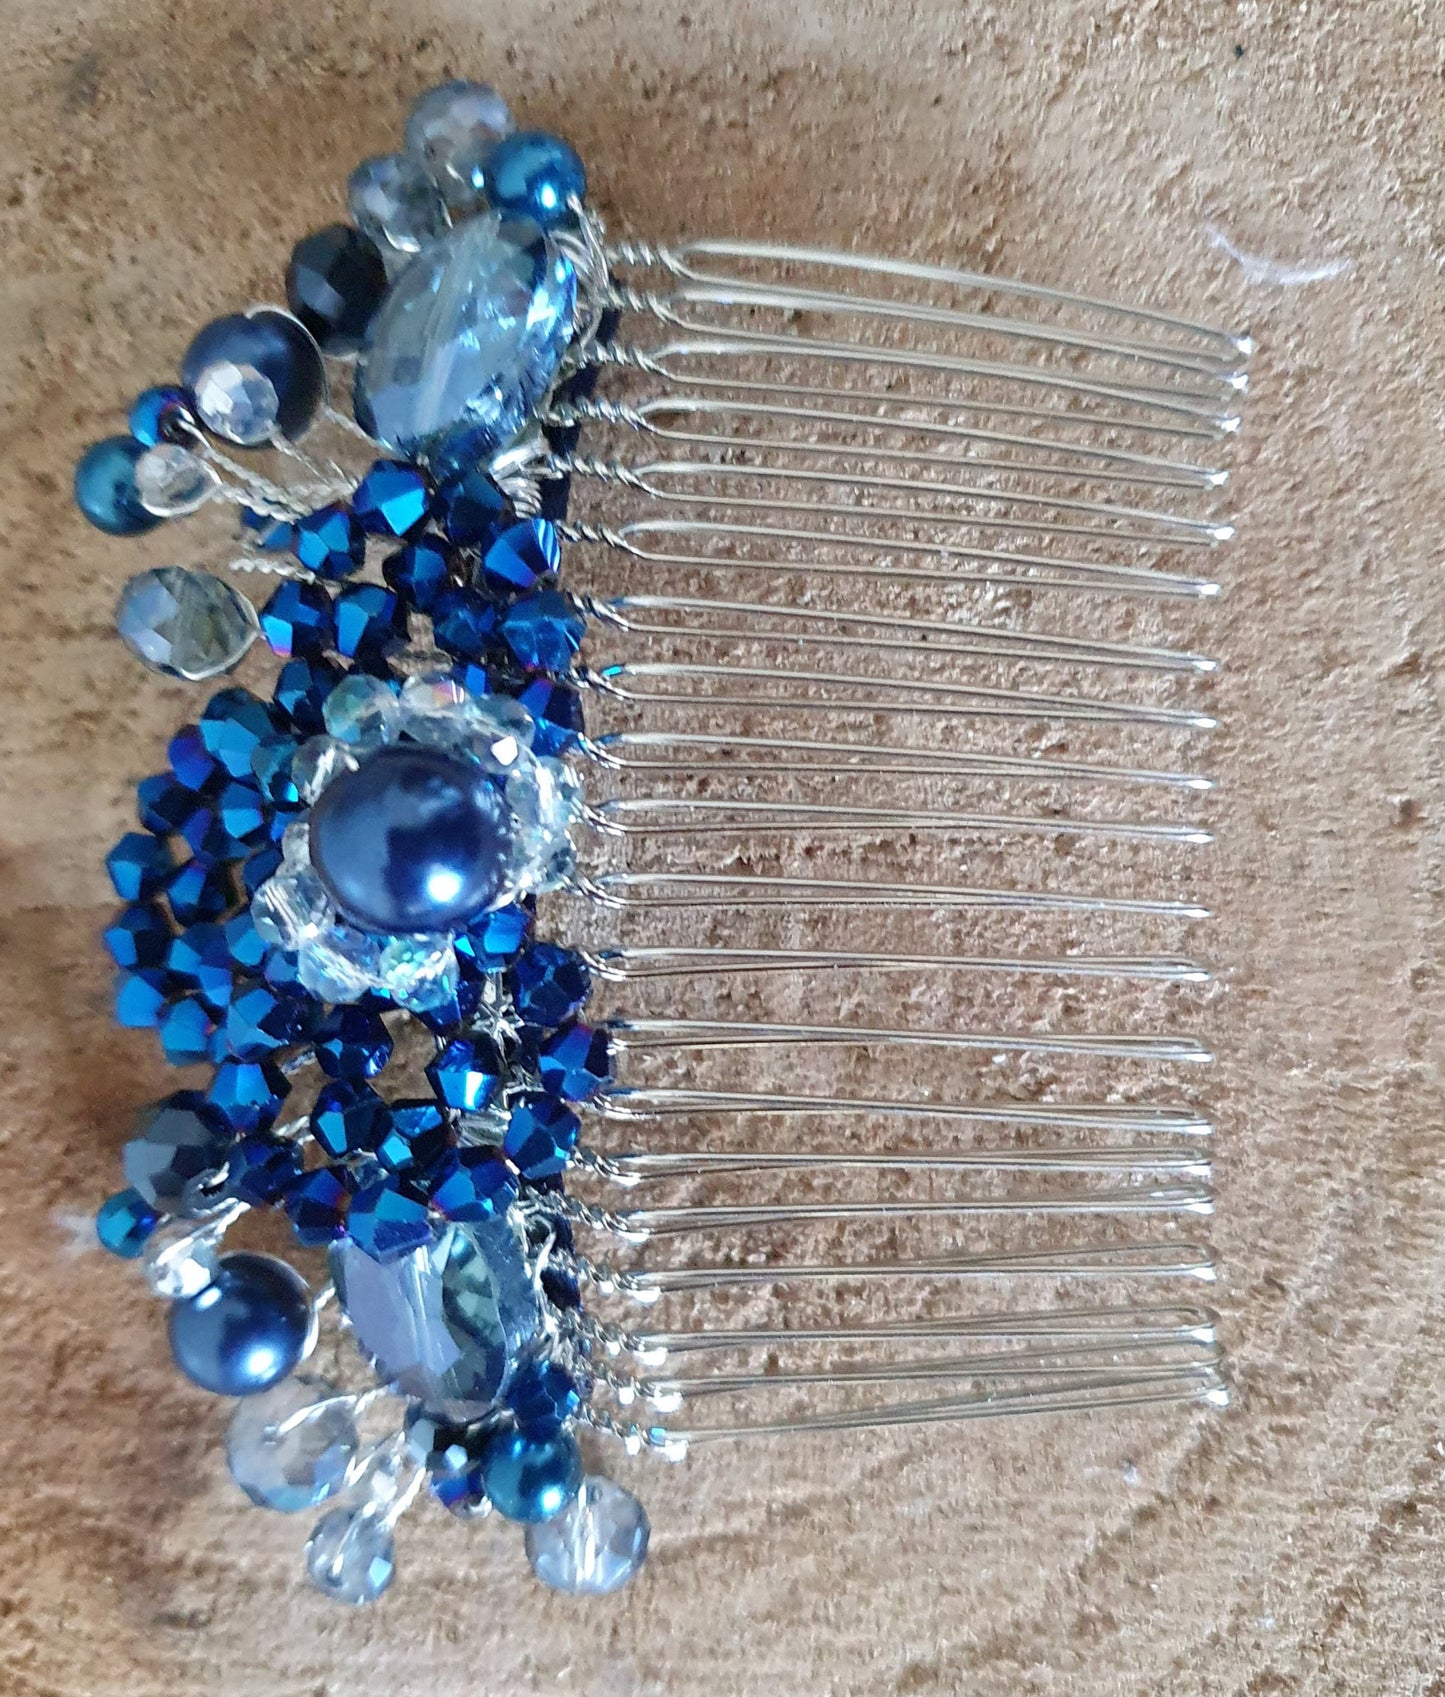 Handmade blue hair comb, with bincone pearls and beads - for a special occasion, elegant hair accessory, wedding hair comb